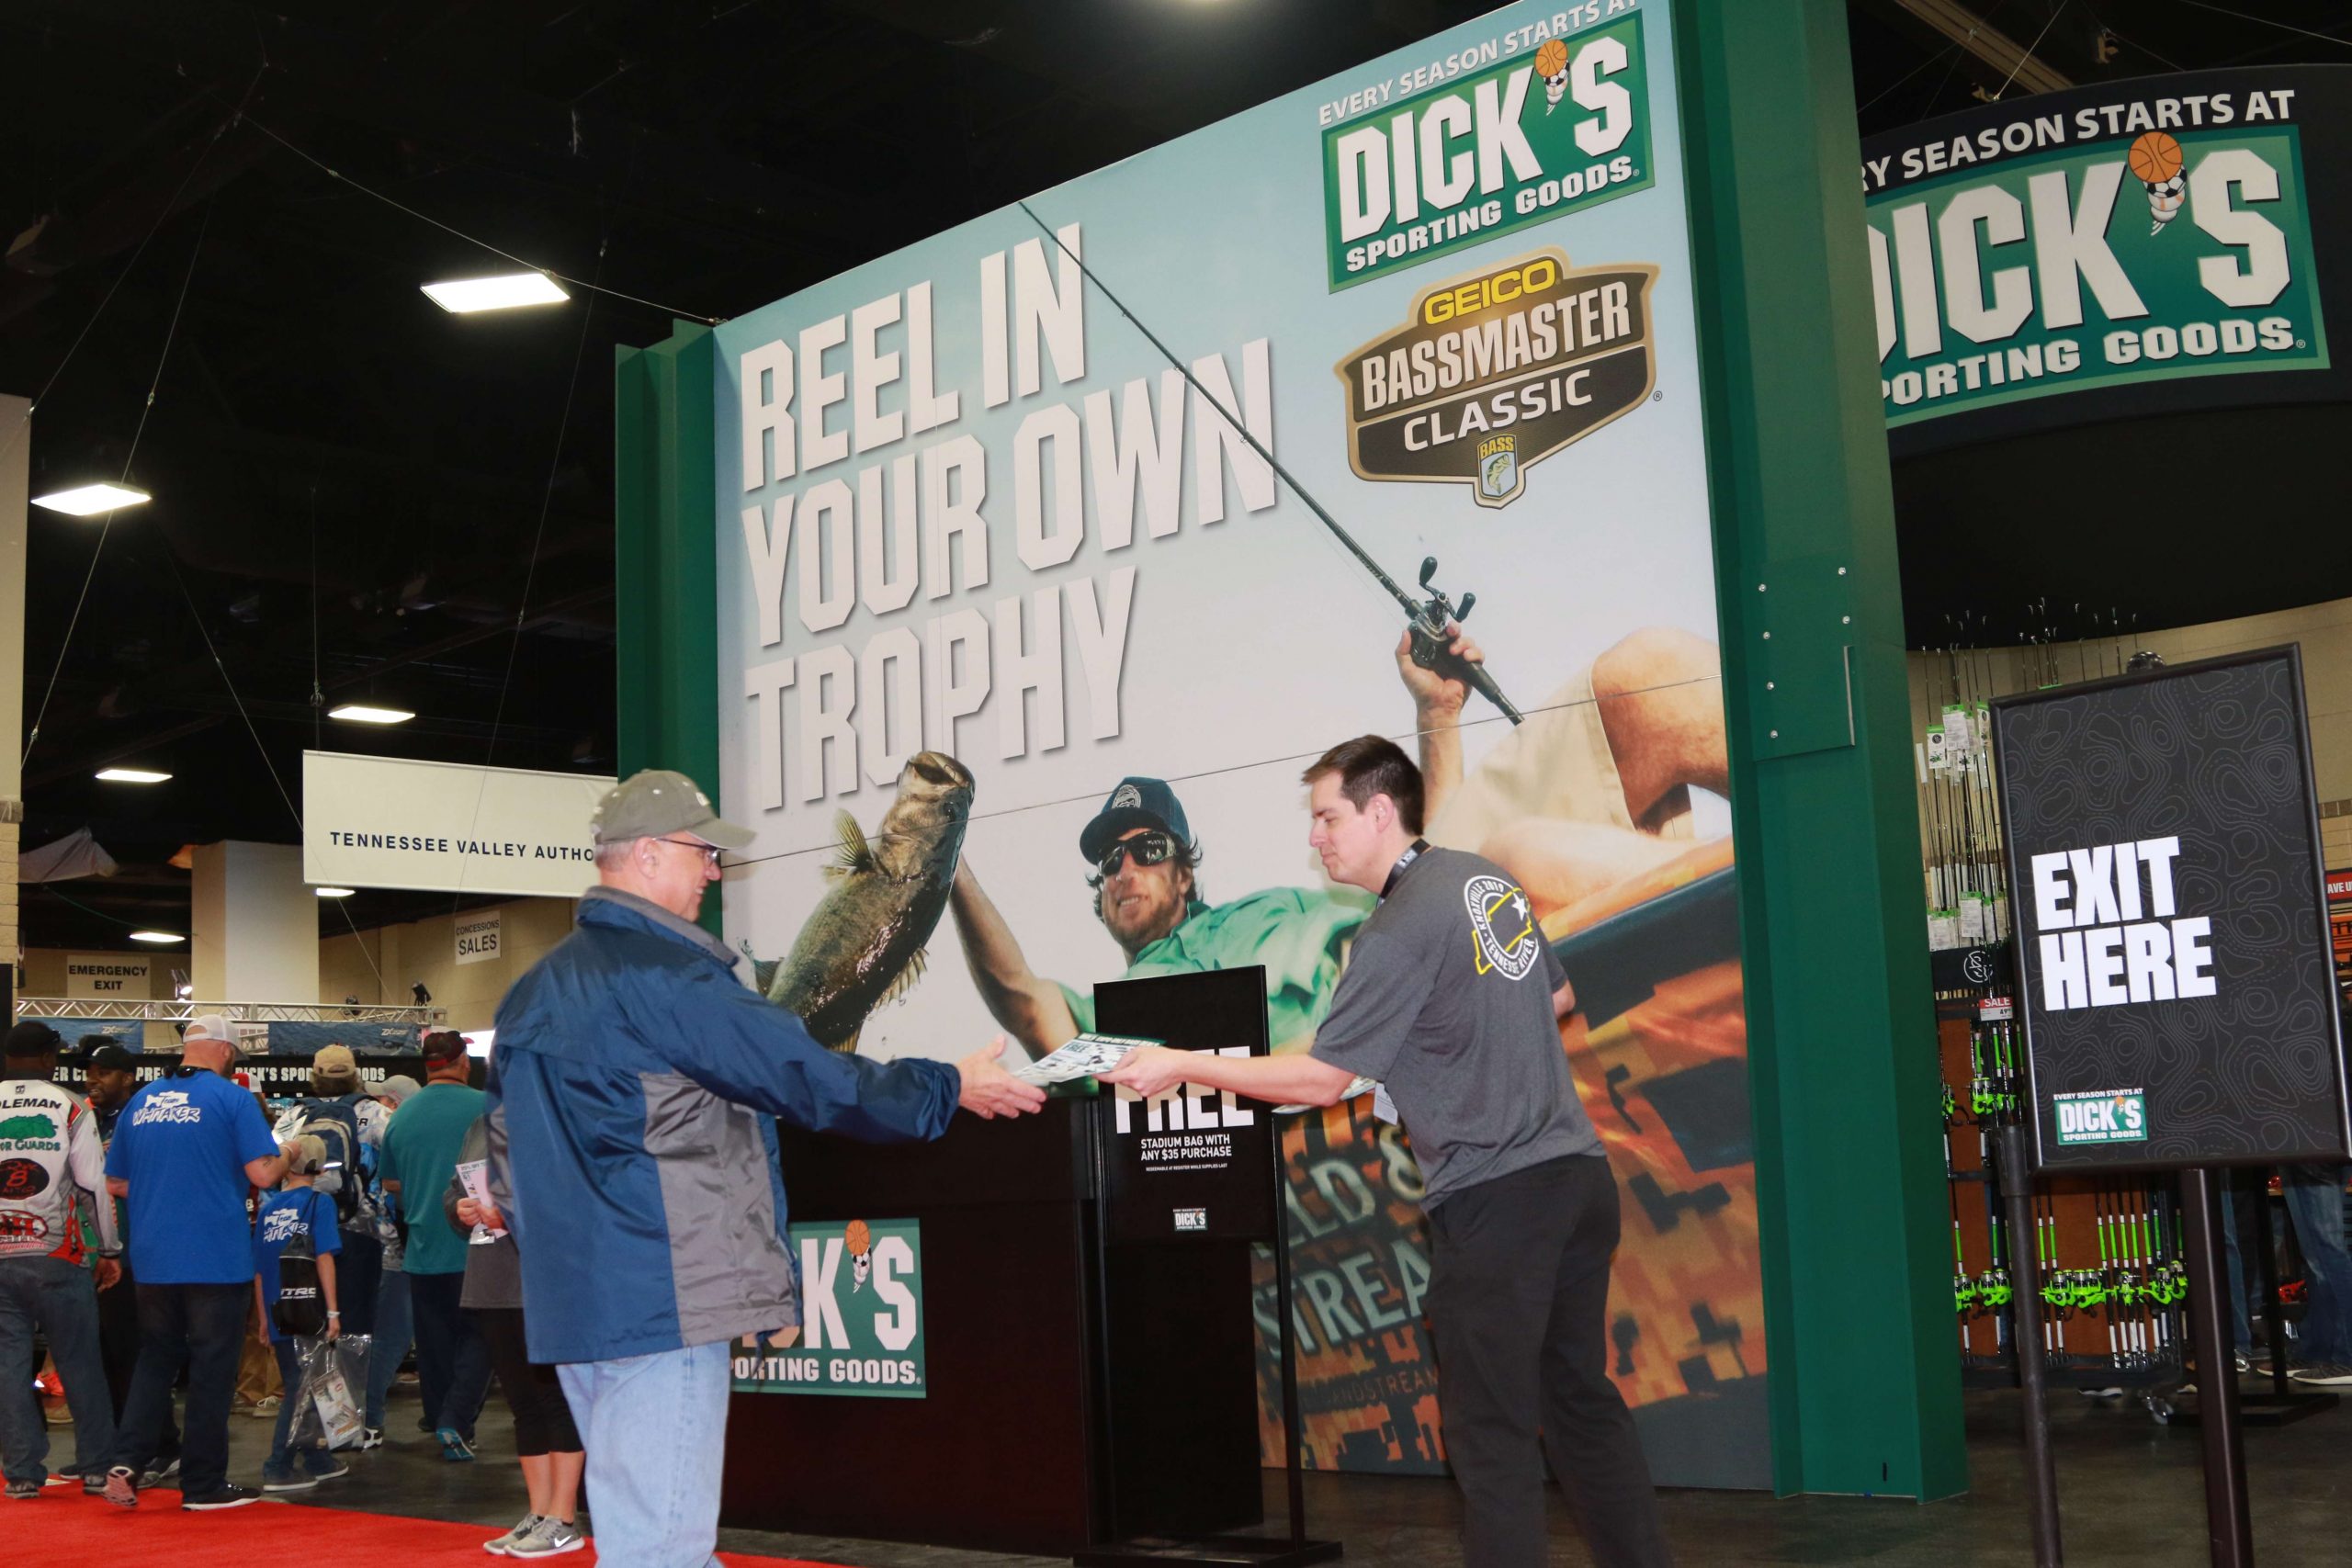 DICK'S Sporting Goods had deals galore, so Dustin Patrick made sure guests were aware of the opportunities.